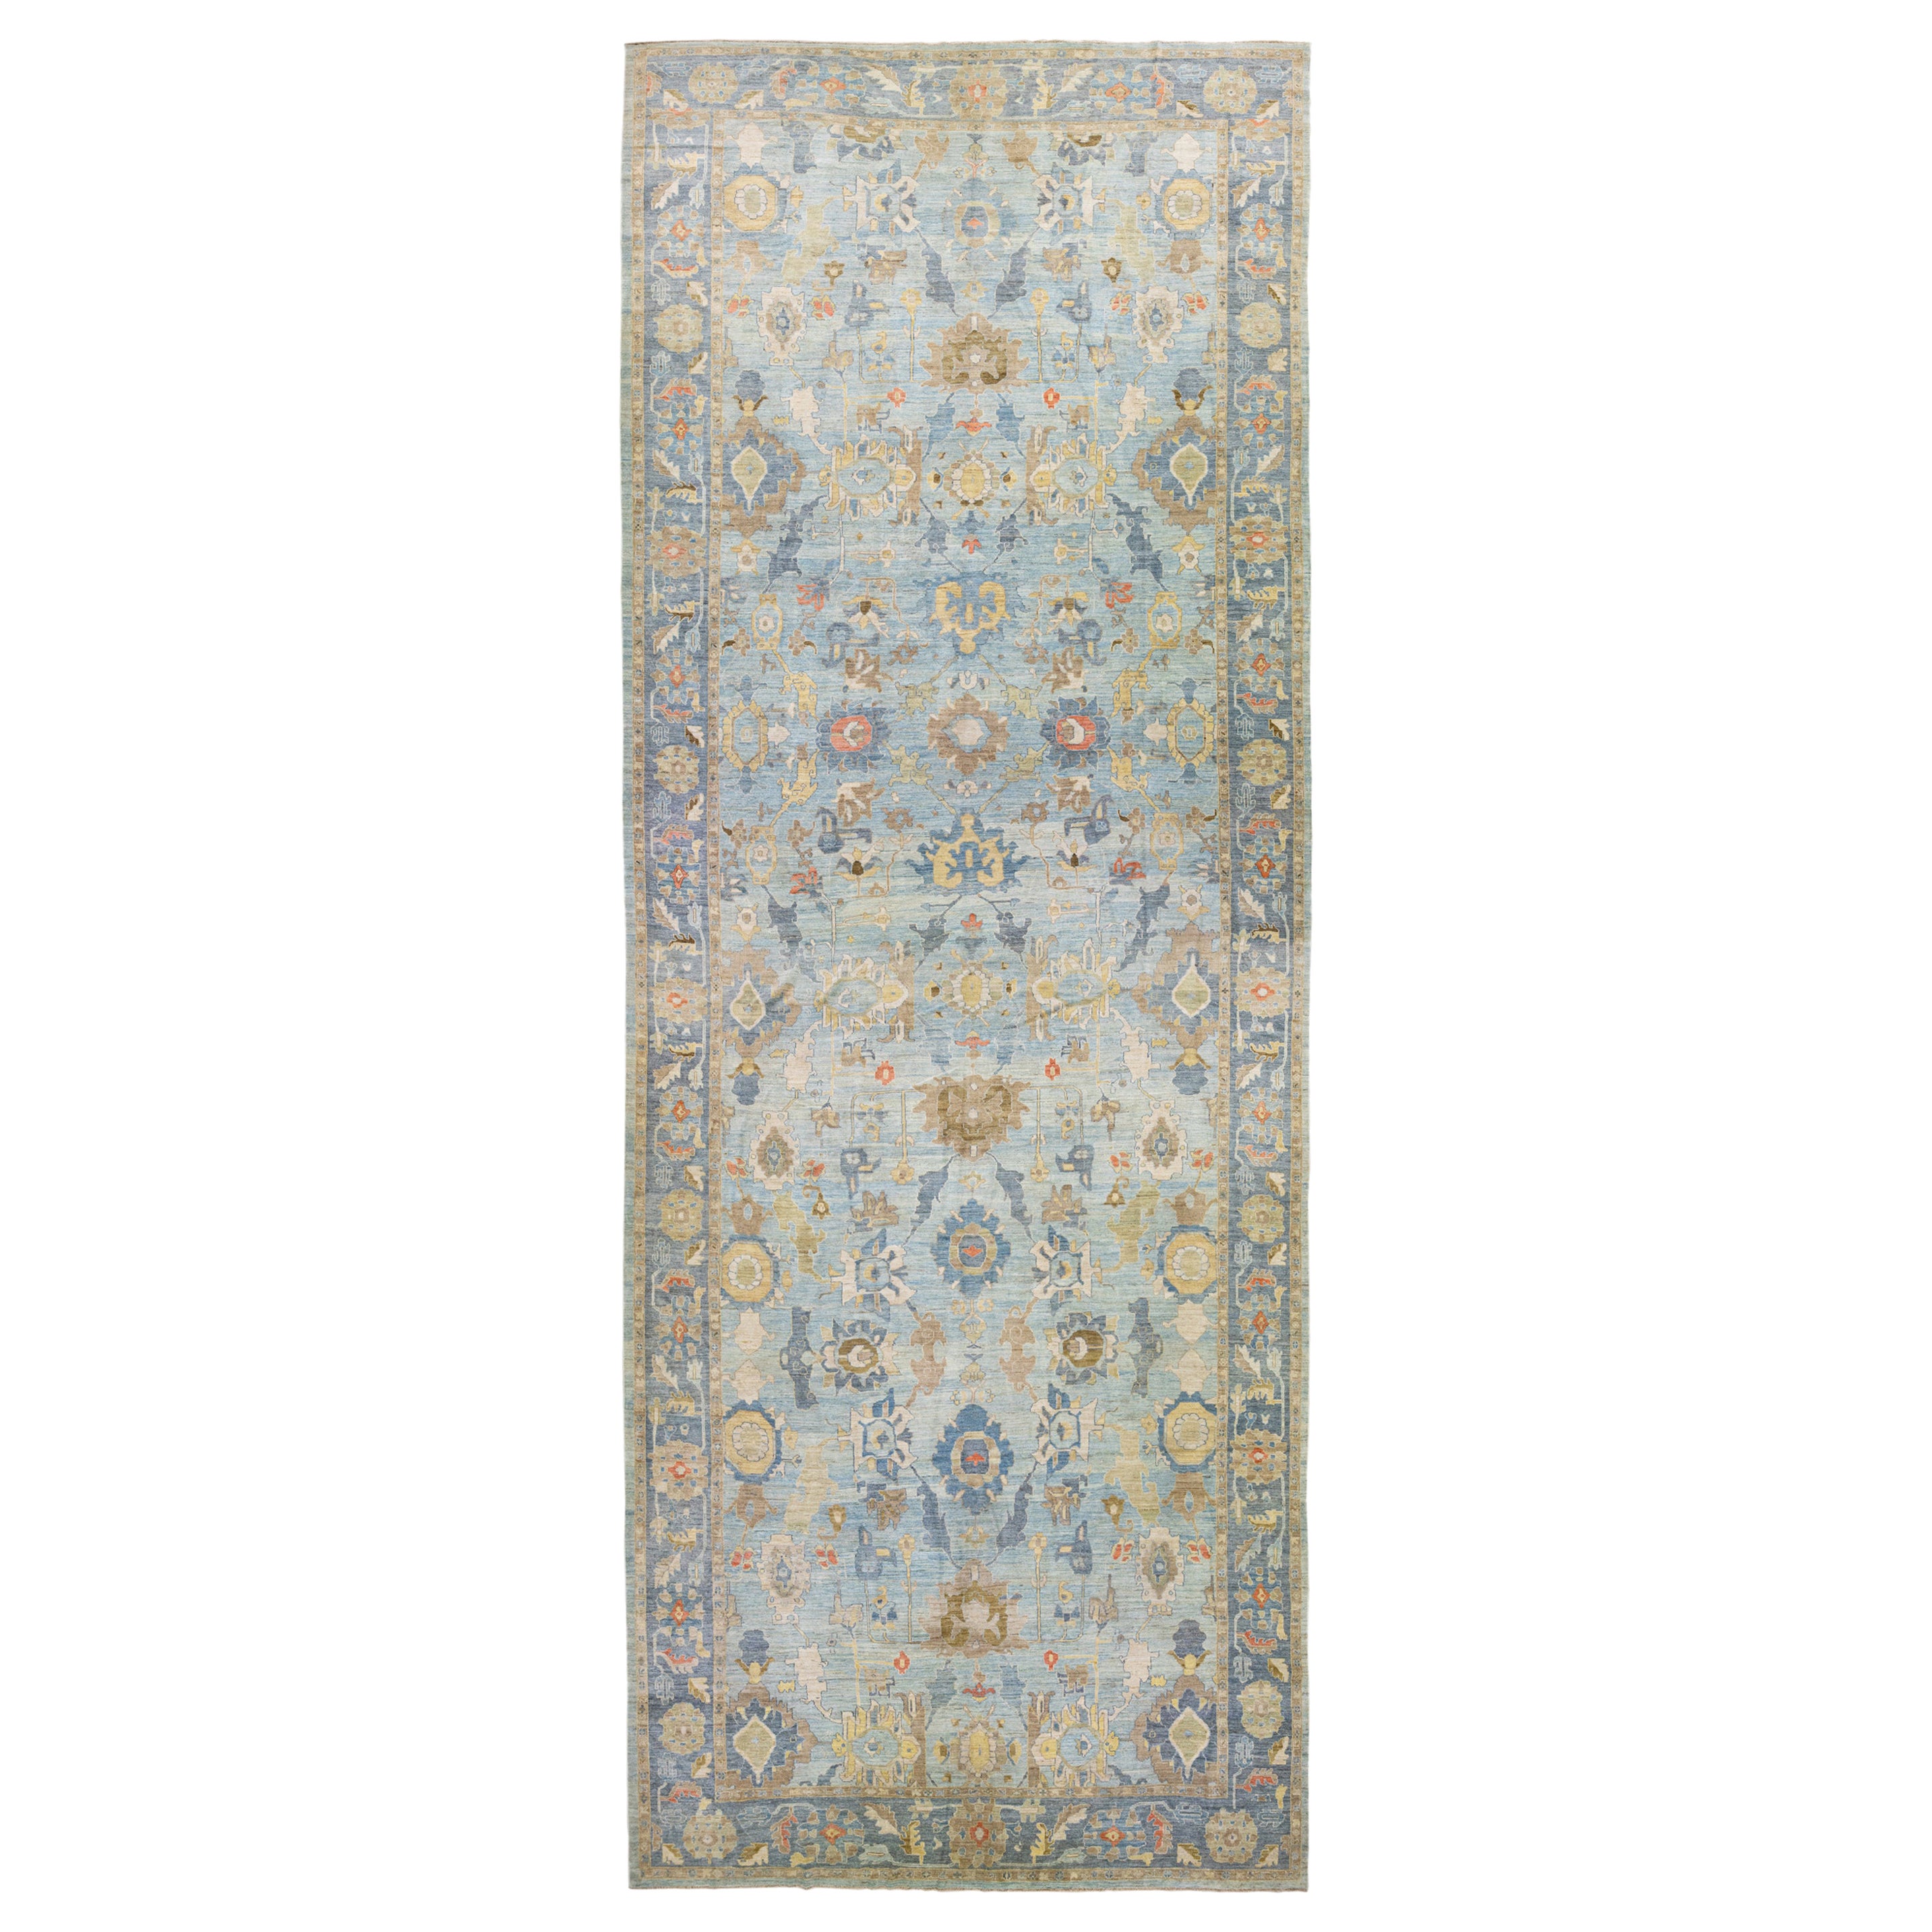 Place Size Blue Modern Sultanabad Handmade Floral Pattern Wool For Sale